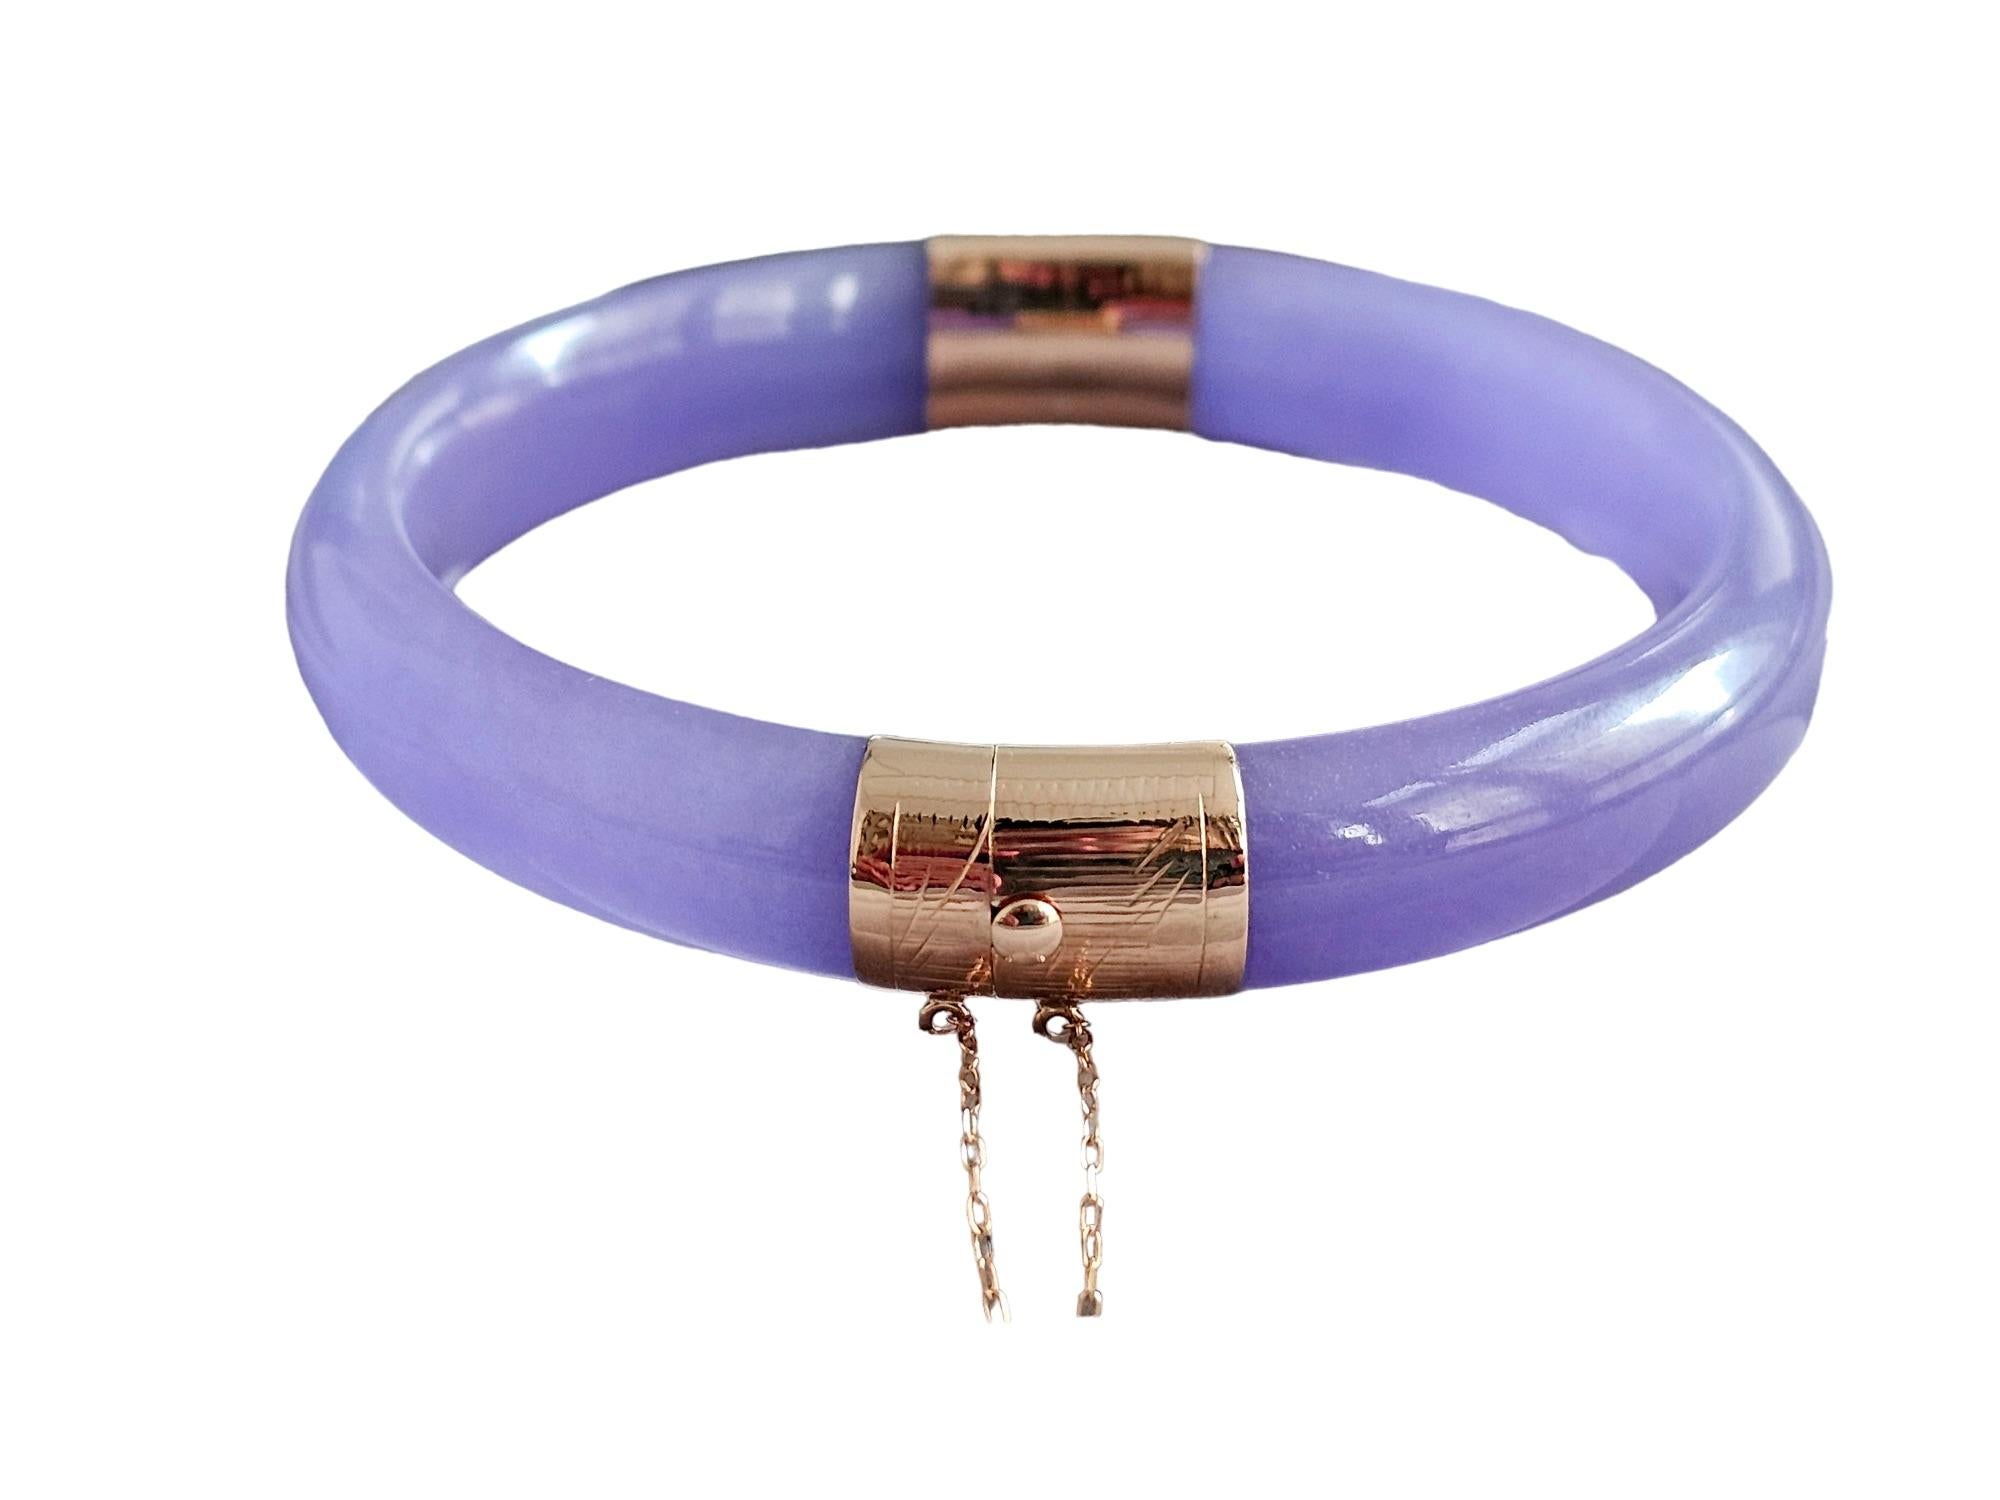 Viceroy's Circular Lavender Jade Bangle Bracelet (with 14K Yellow Gold) For Sale 2